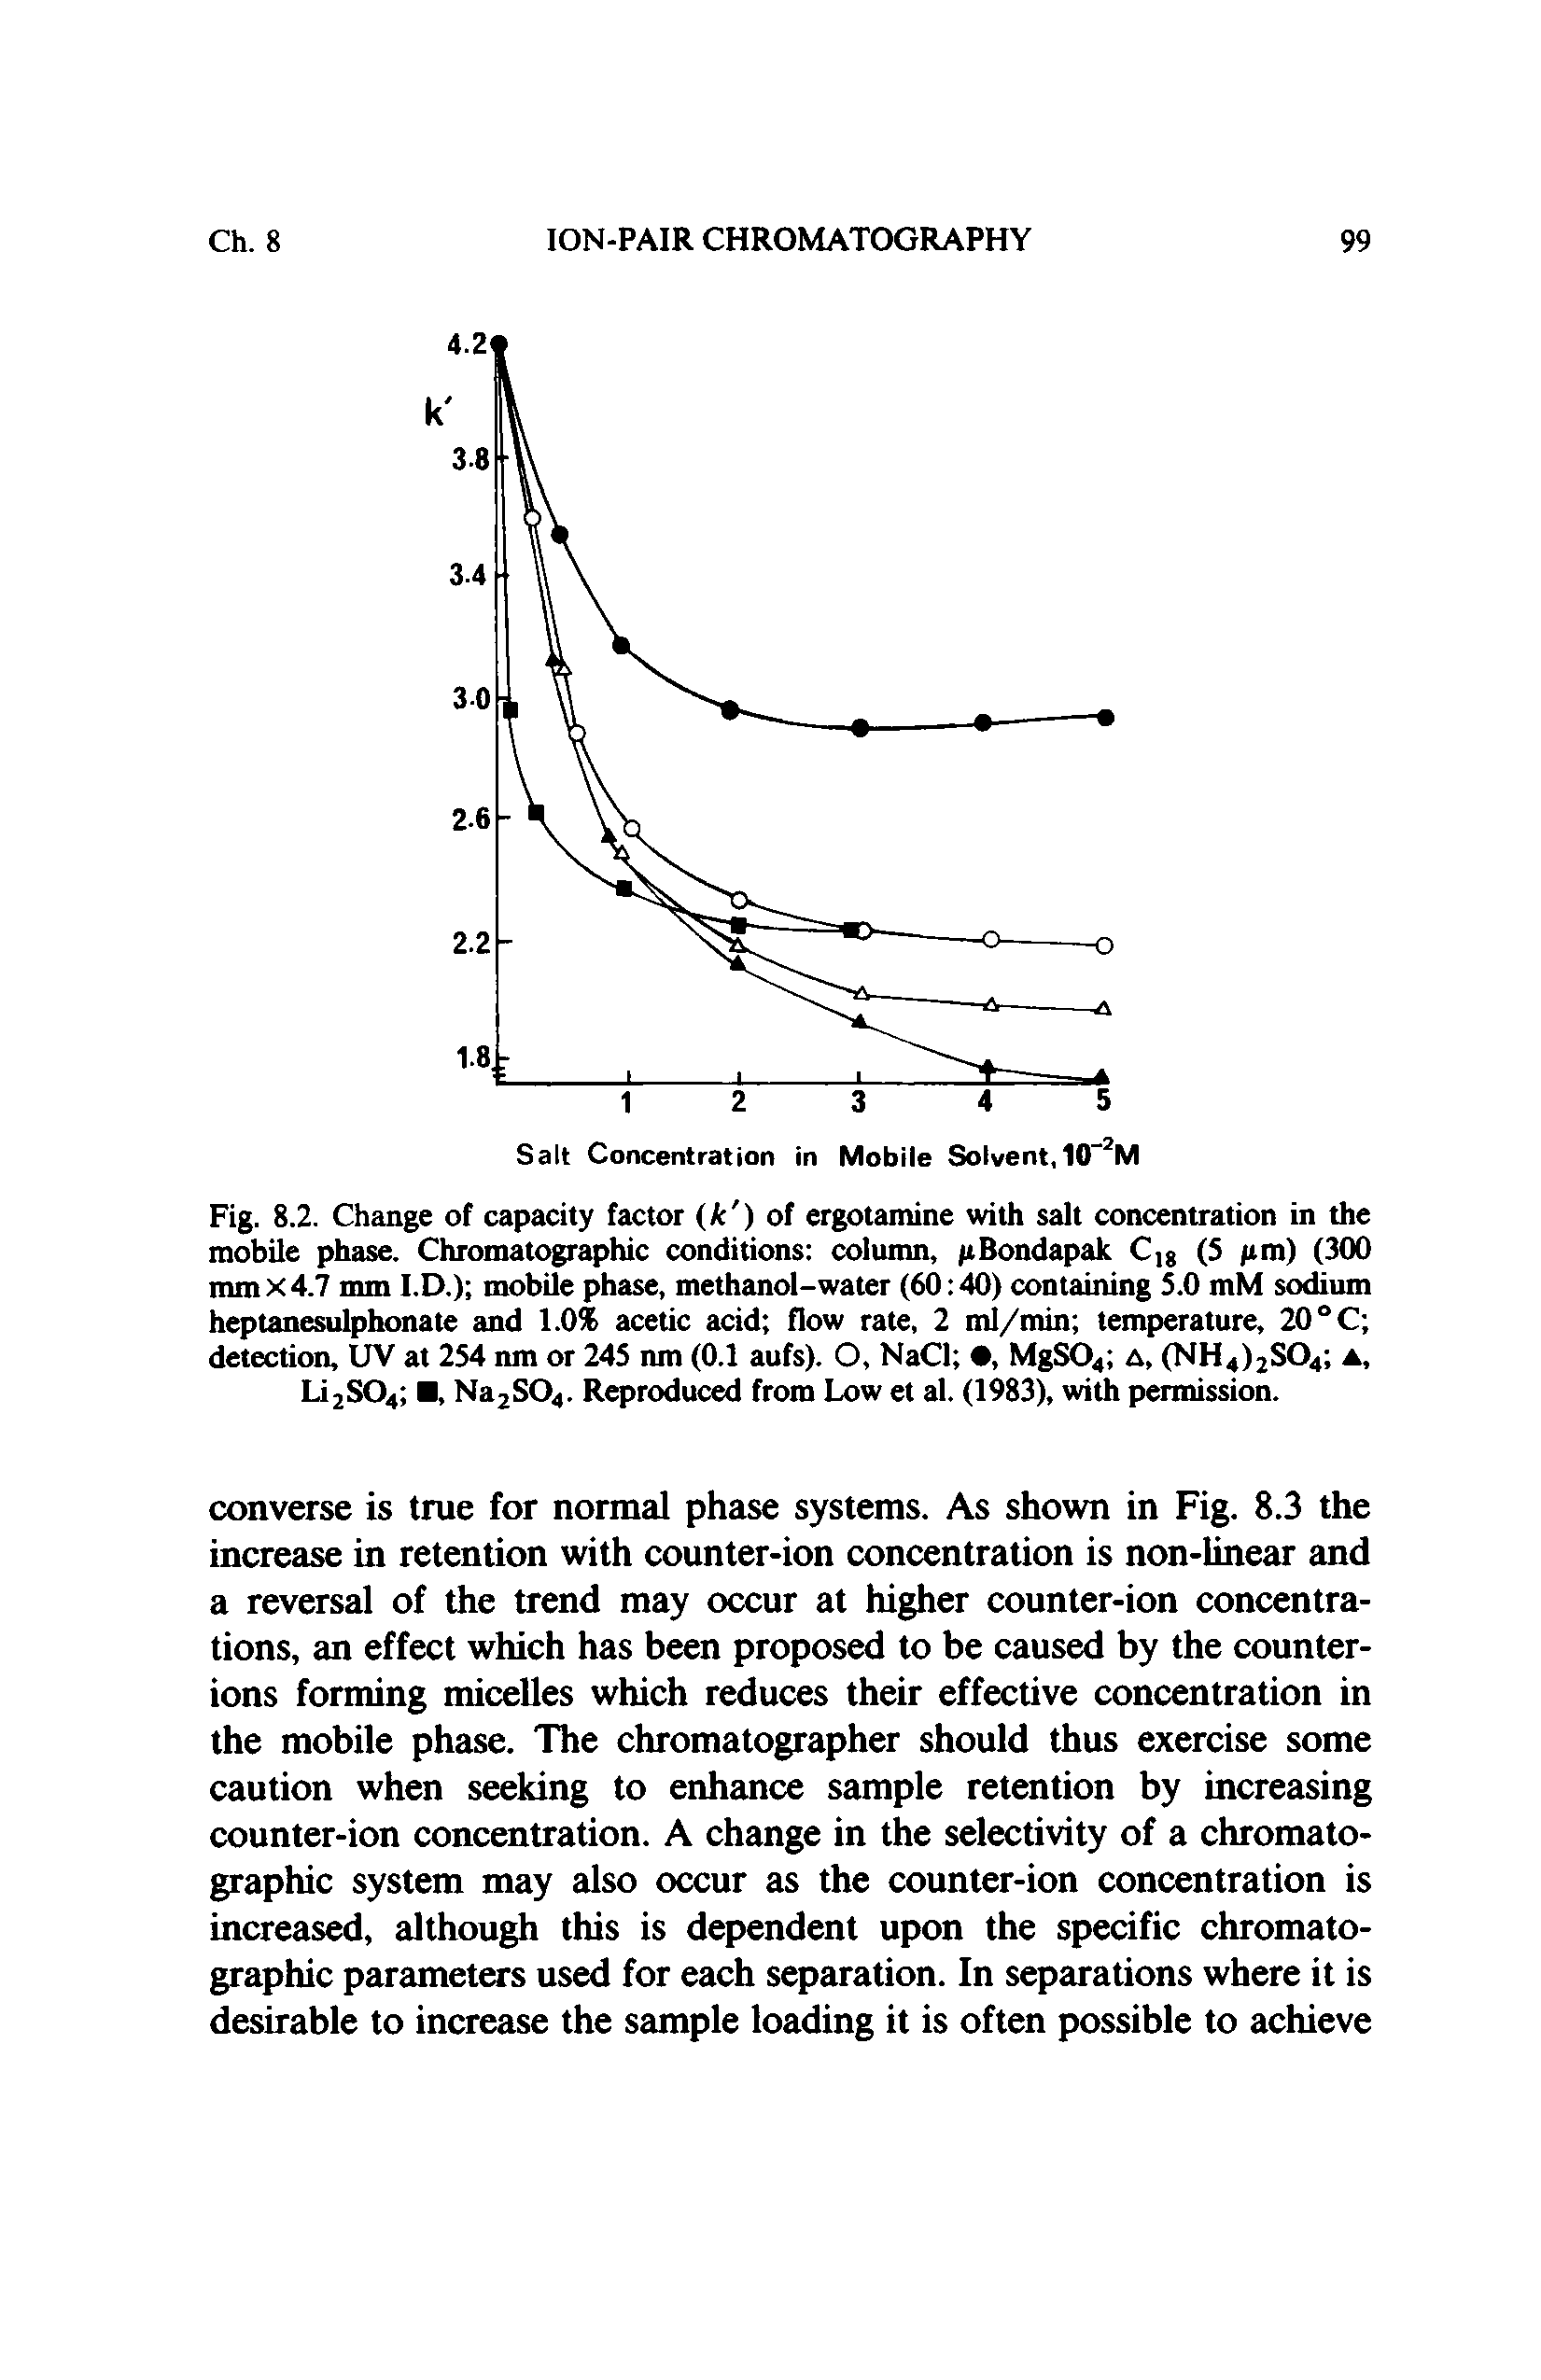 Fig. 8.2. Change of capacity factor k ) of ergotamine with salt concentration in the mobile phase. Chromatographic conditions column, pBondapak Cjg (S pm) (300 mm X 4.7 mm I.D.) mobile phase, methanol-water (60 40) containing S.O mM sodium heptanesulphonate and 1.0% acetic acid flow rate, 2 ml/min temperature, 20 °C detection, UV at 254 nm or 245 nm (0.1 aufs). O, NaCl , MgS04 a, (NH4)2S04 a, U2SO4 , Na2S04. Reproduced from Low et al. (1983), with permission.